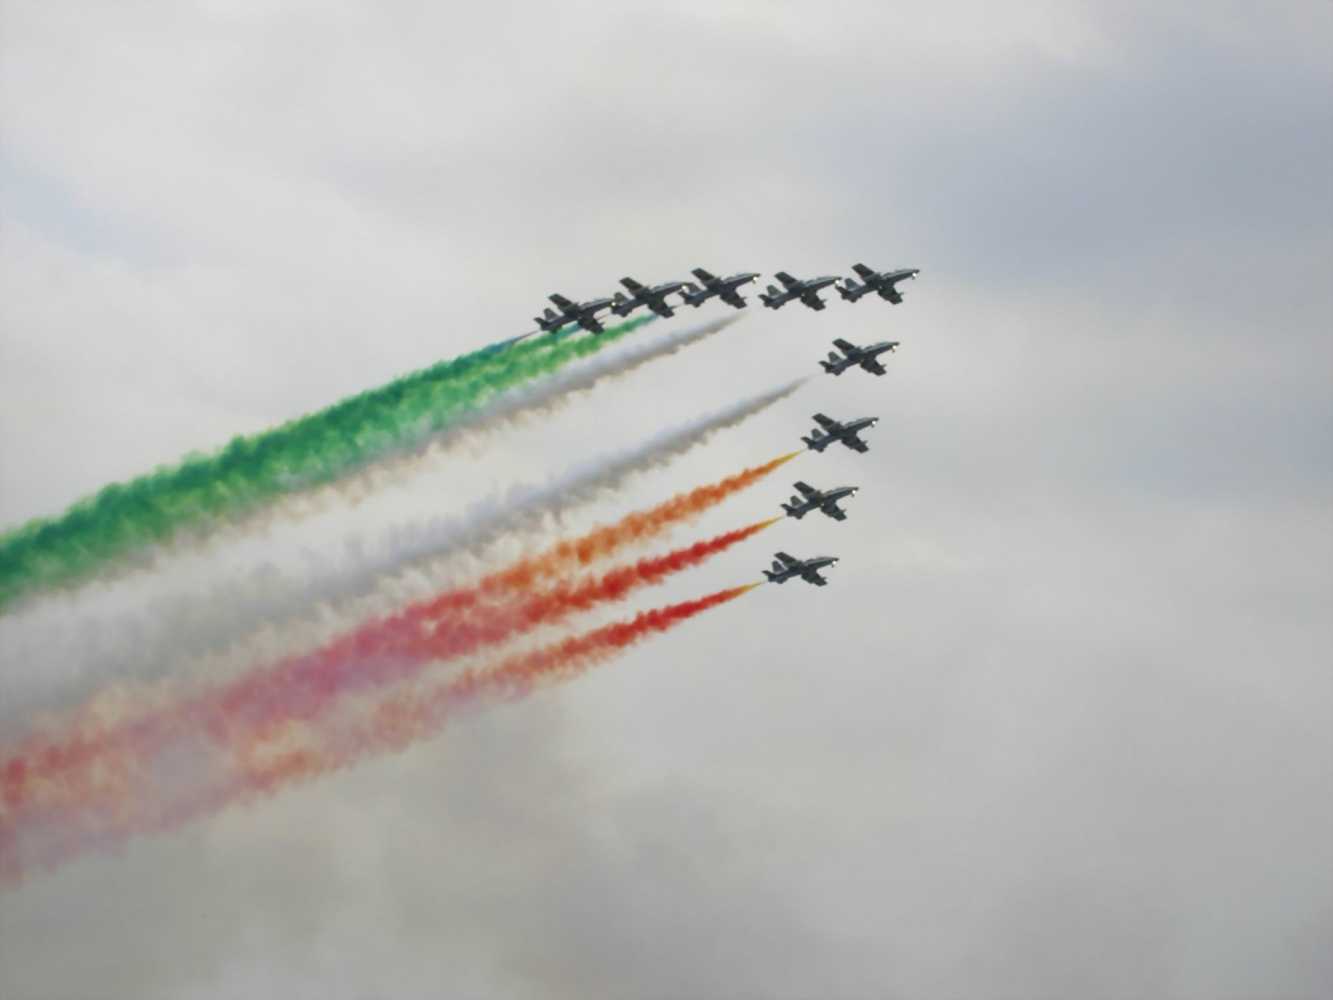 Frecce Tricolori flying over the Rivolto airbase: 37 KB; click on the image to the enlarge